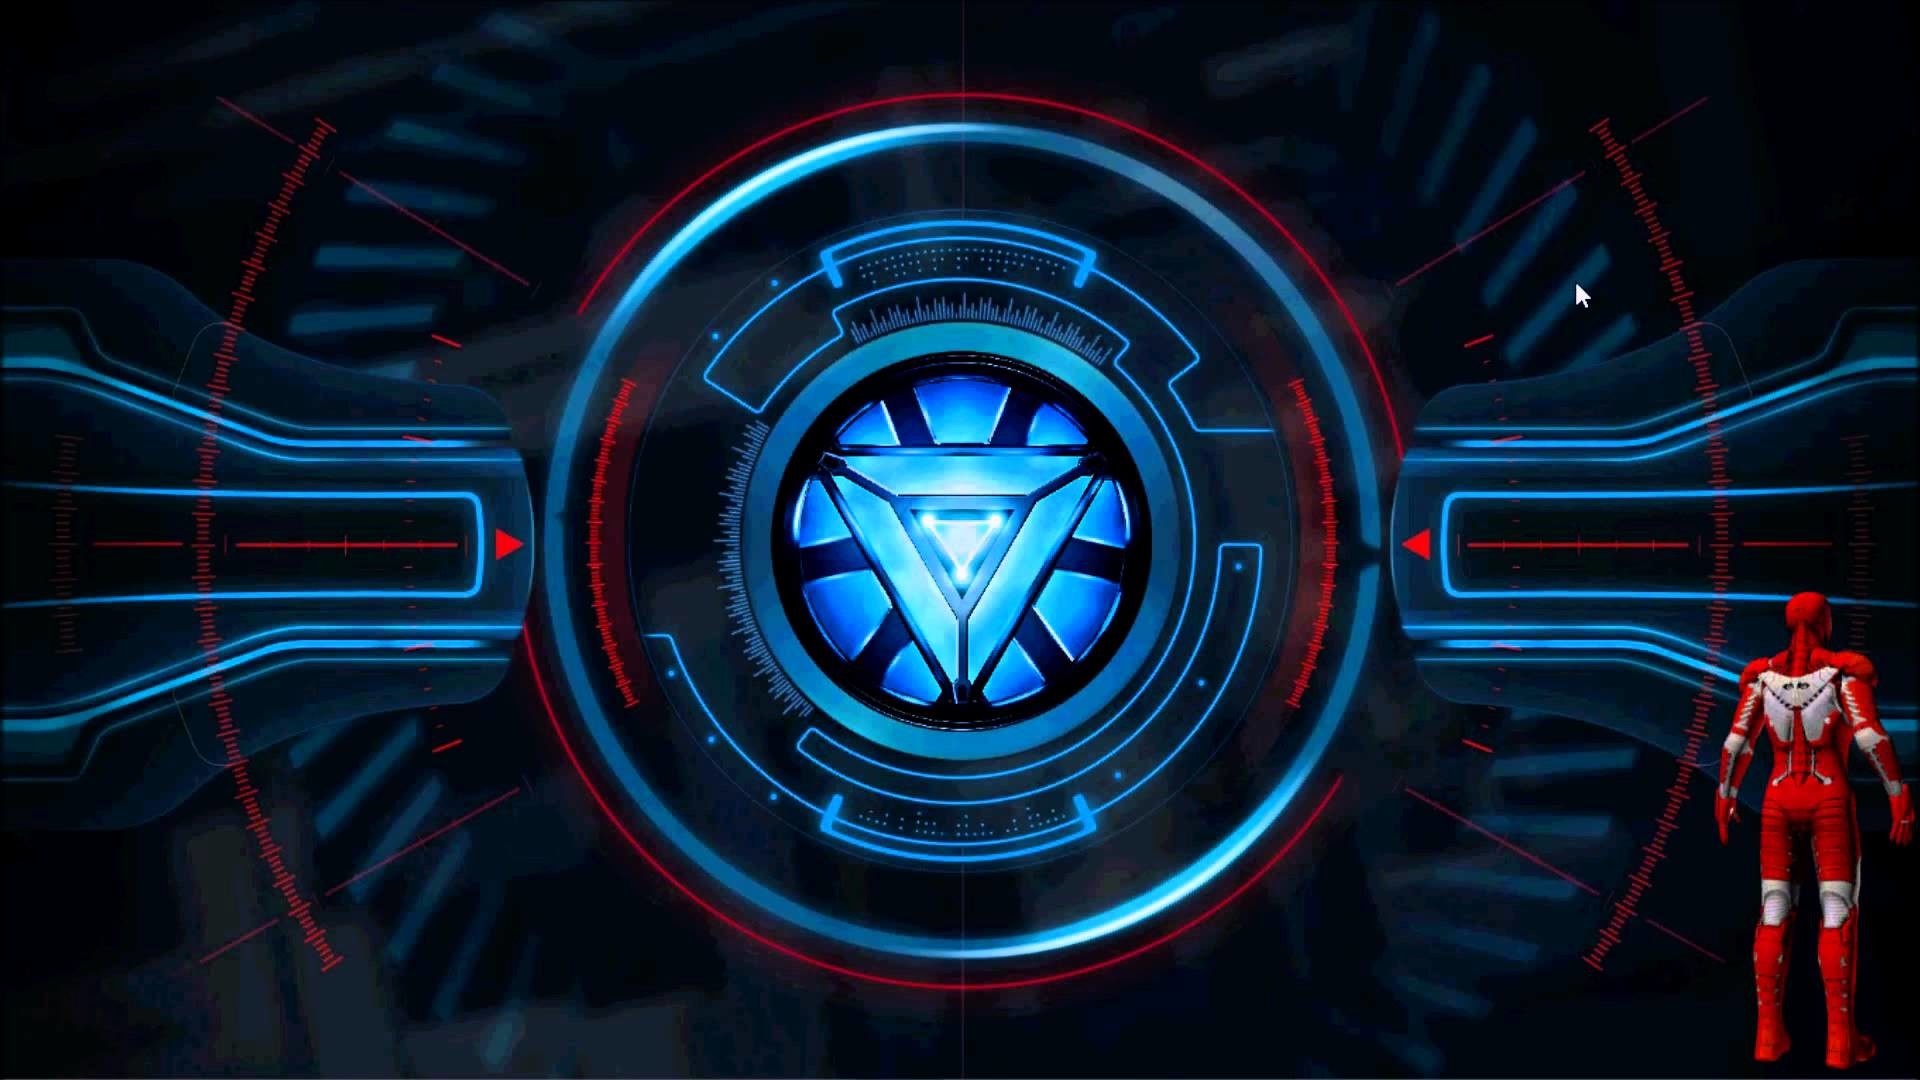 Iron Man Jarvis Animated Wallpaper (79+ images)